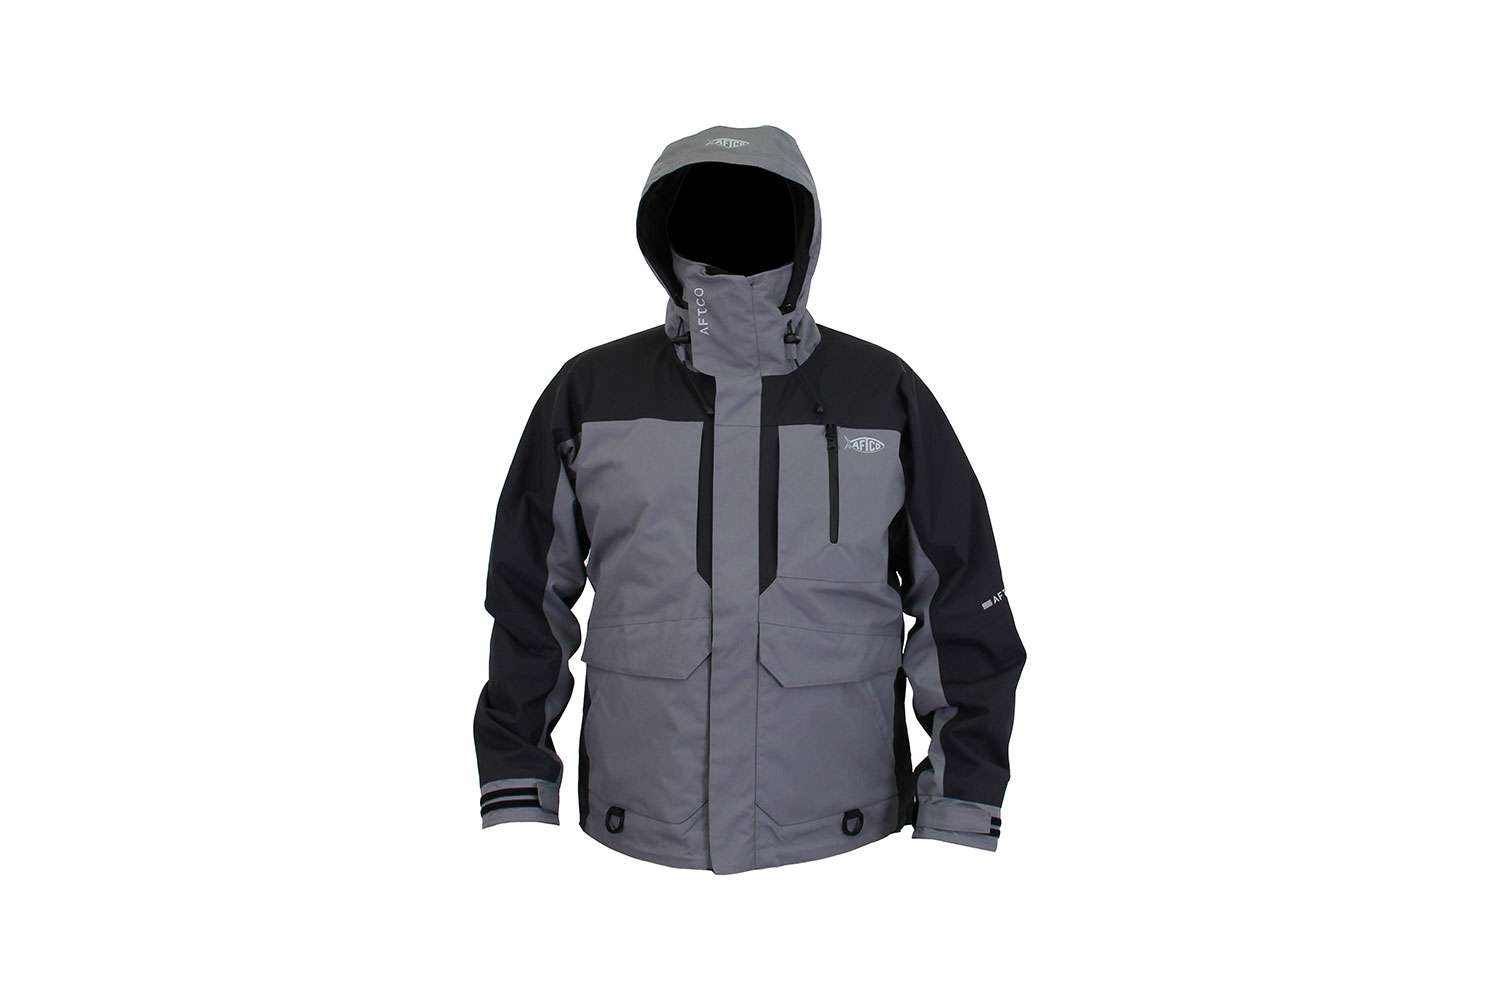 <p><b>AFTCO Hydronaut Waterproof Jacket, $249</b></p> Hydronaut was meticulously designed based off the feedback from the AFTCO Freshwater Pro Team to handle extreme foul weather conditions when comfort, performance and focus is needed most. AFTCO took extensive measures to re-engineer rain gear as we know it with a 20K 100-percent waterproof two-layer nylon shell, SpeedVent airflow hood, integrated camera mount pocket system, tricot hand warmer pockets, rubberized internal sleeve cuffs, Cordura reinforced pliers pocket and knees.<br> <a href=